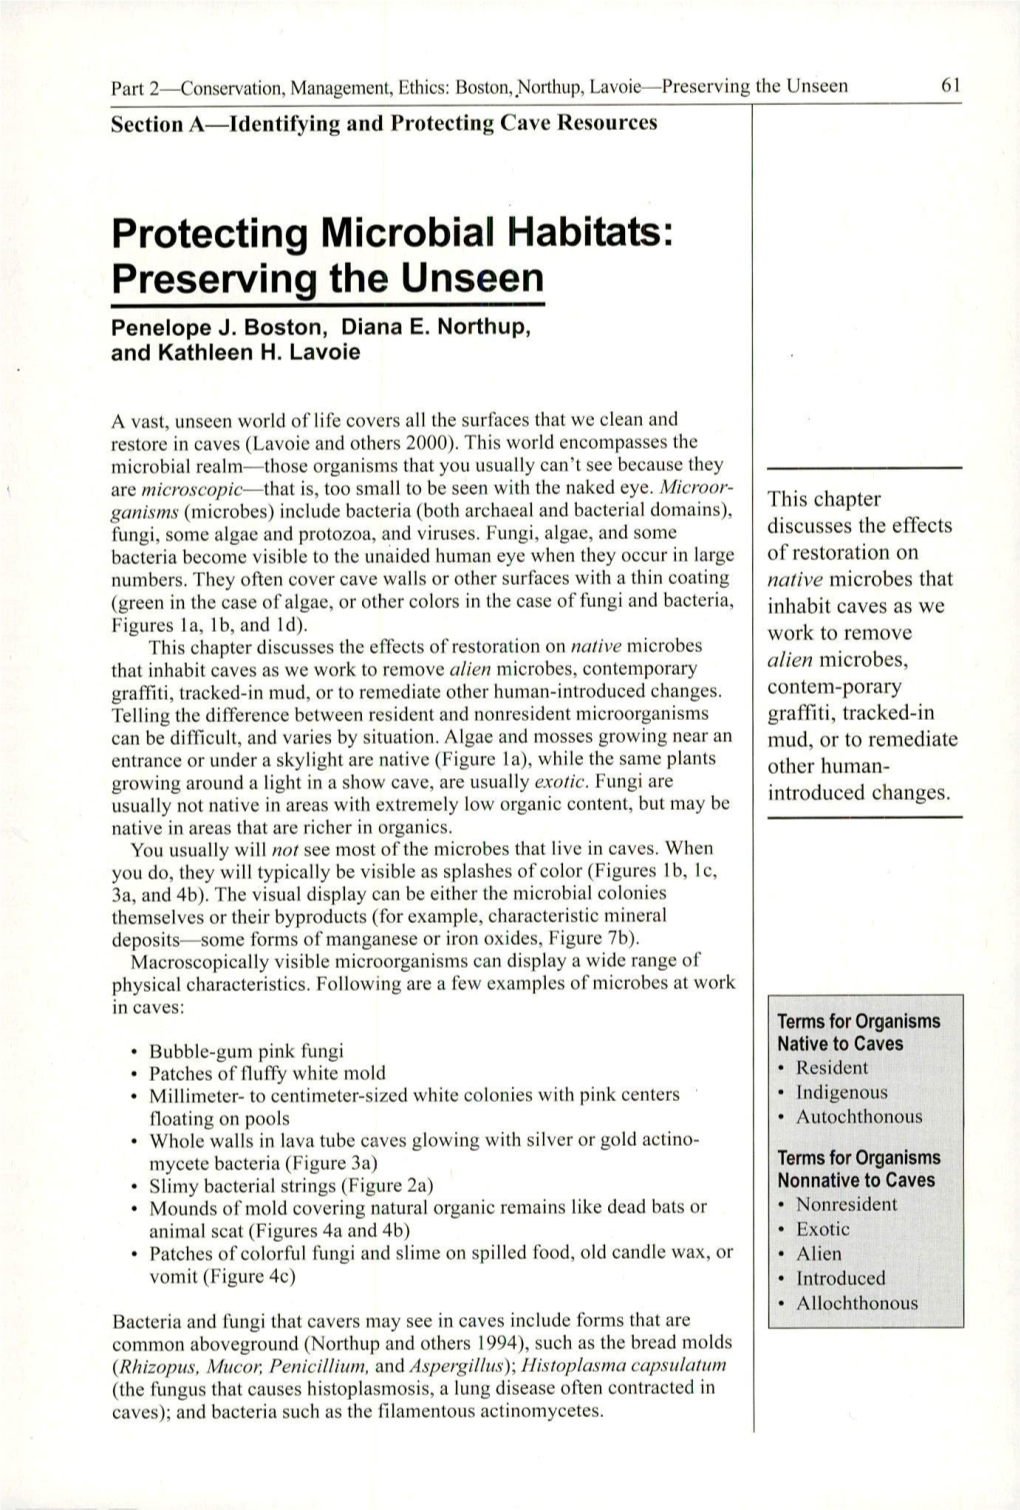 Protecting Microbial Habitats: Preserving the Unseen Penelope J